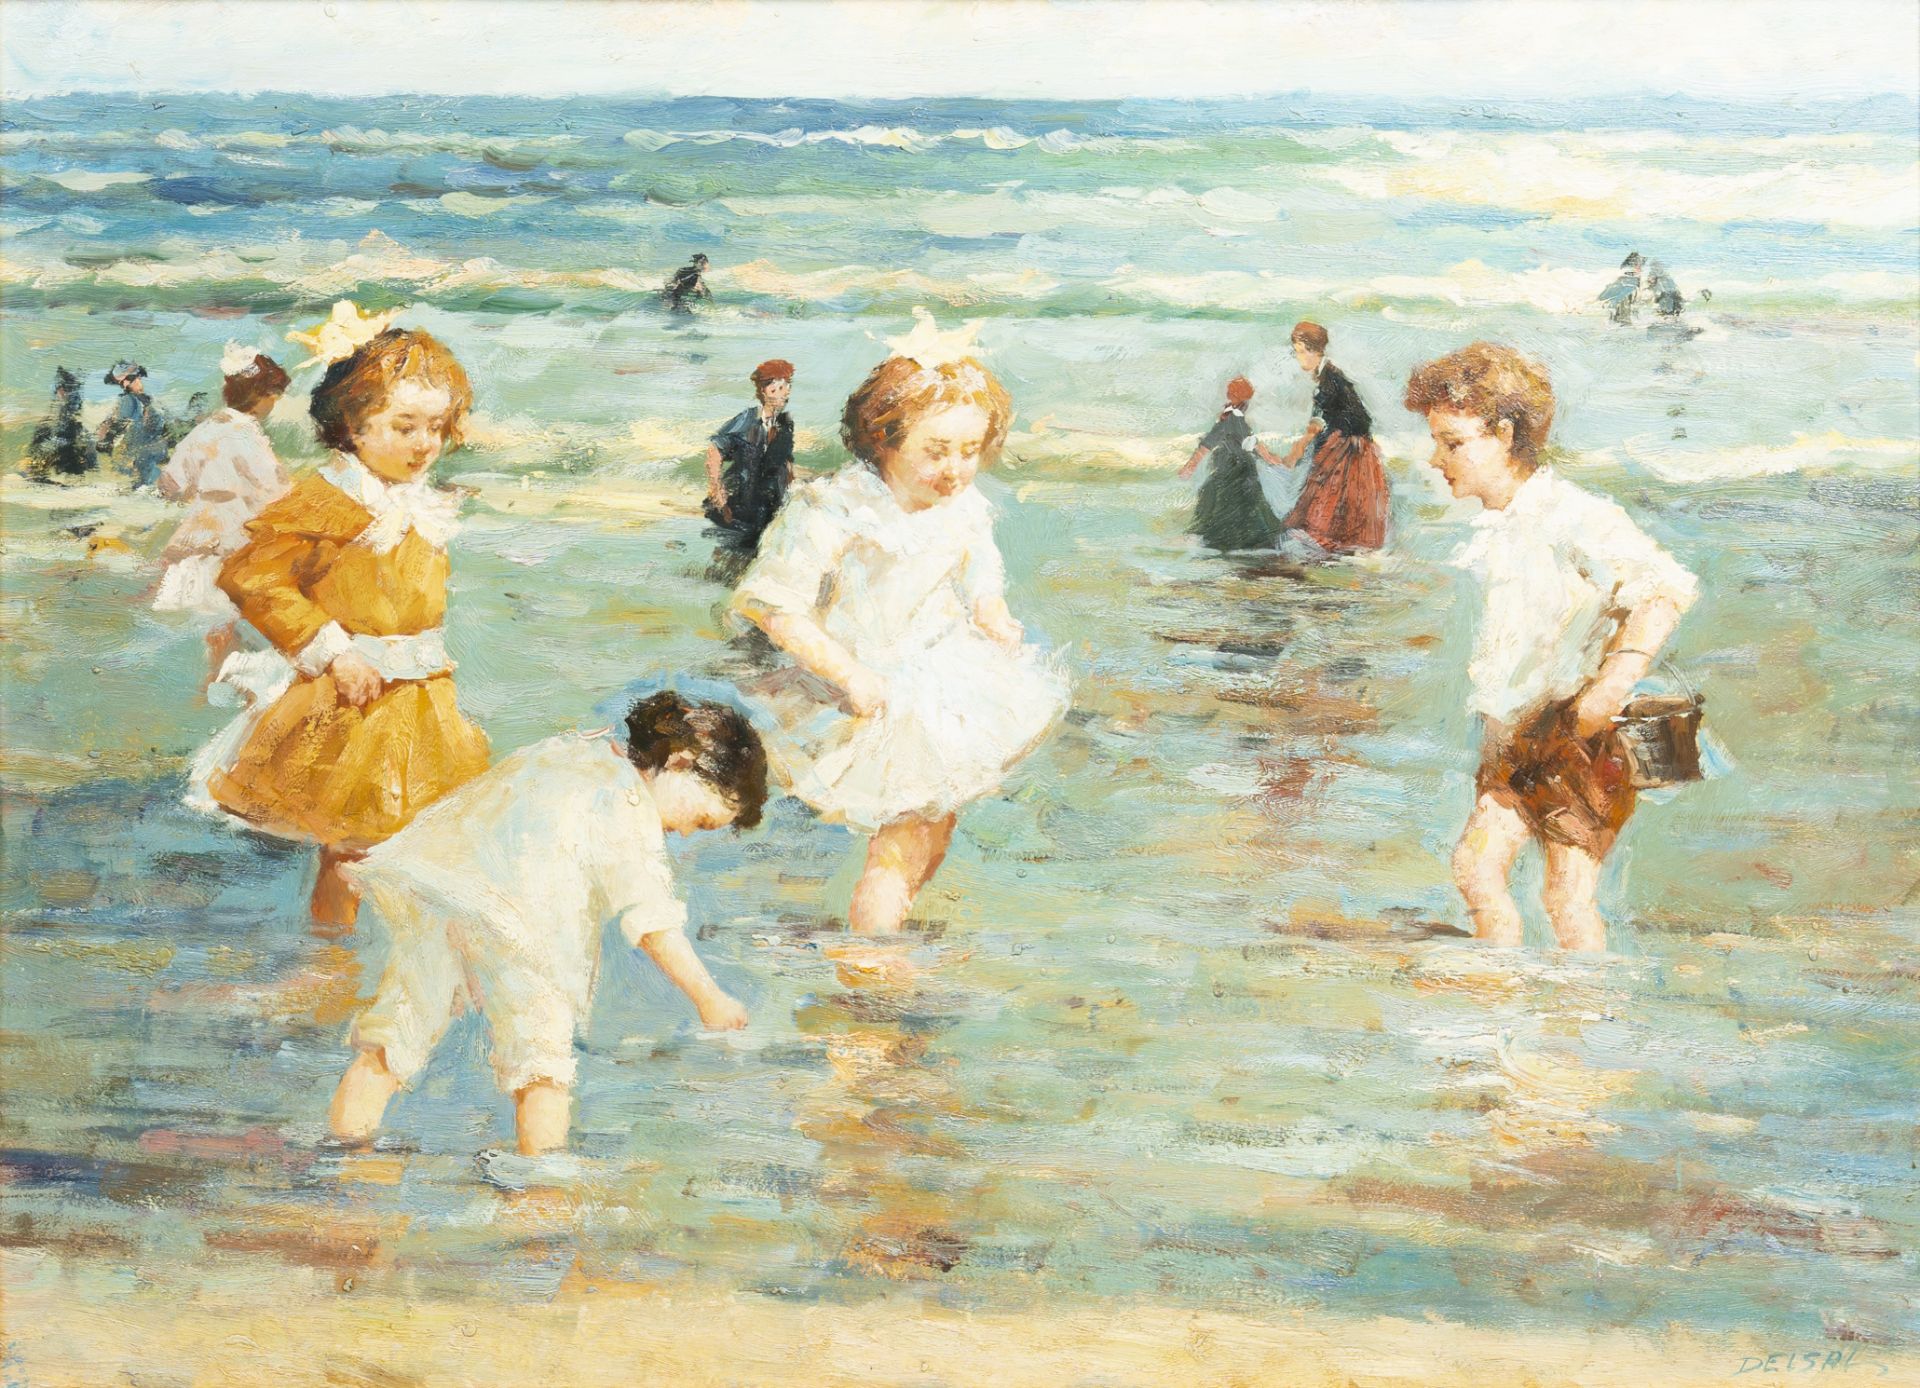 Delsal (?): Children playing on the coast, oil on canvas